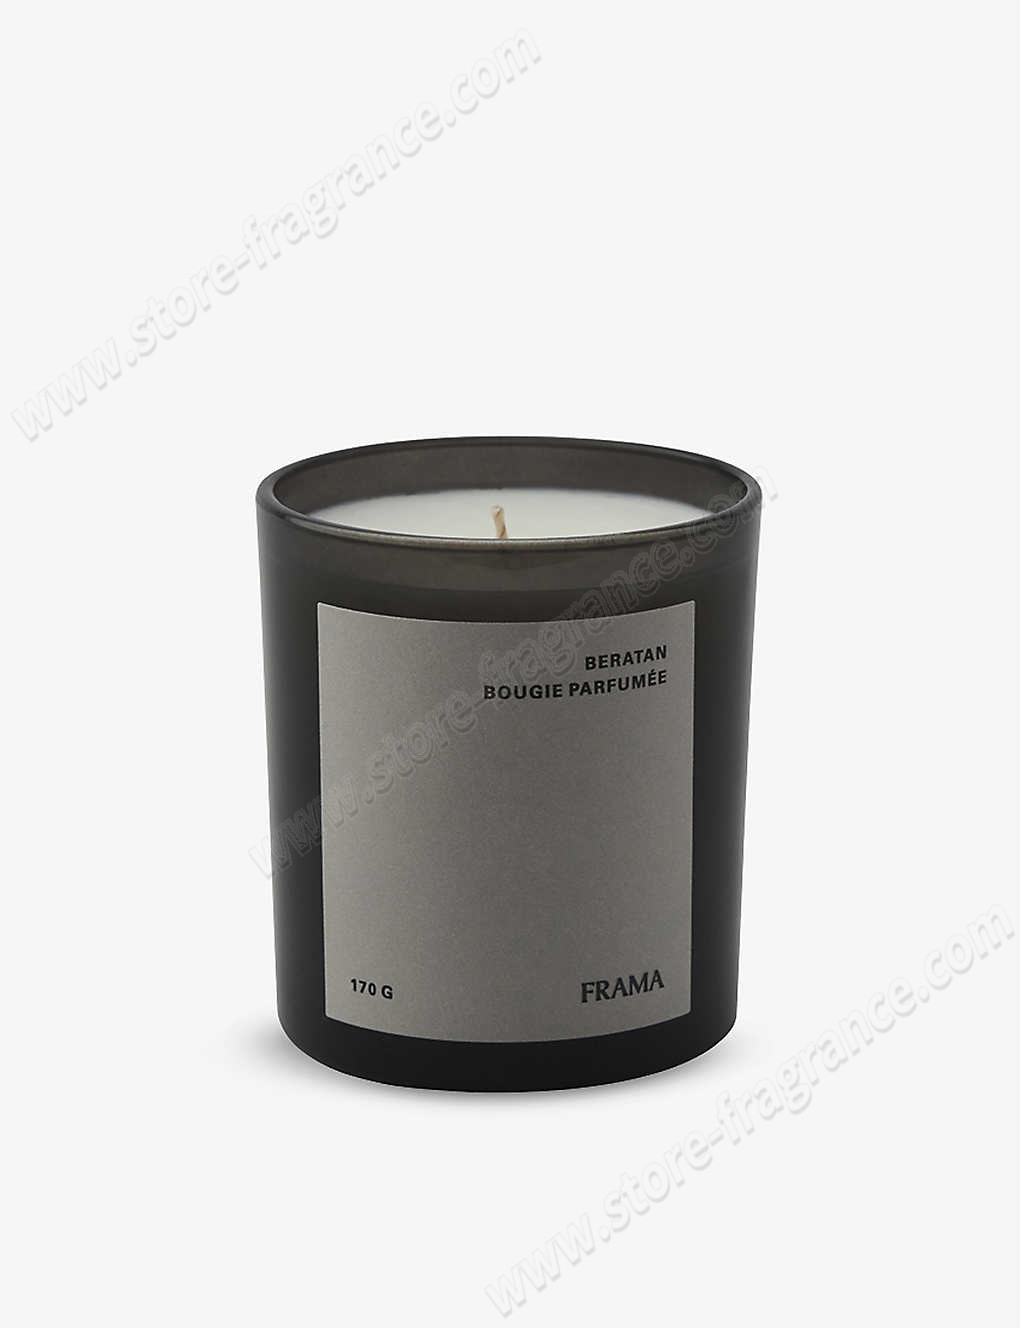 FRAMA/Beratan scented candle 170g ✿ Discount Store - -0